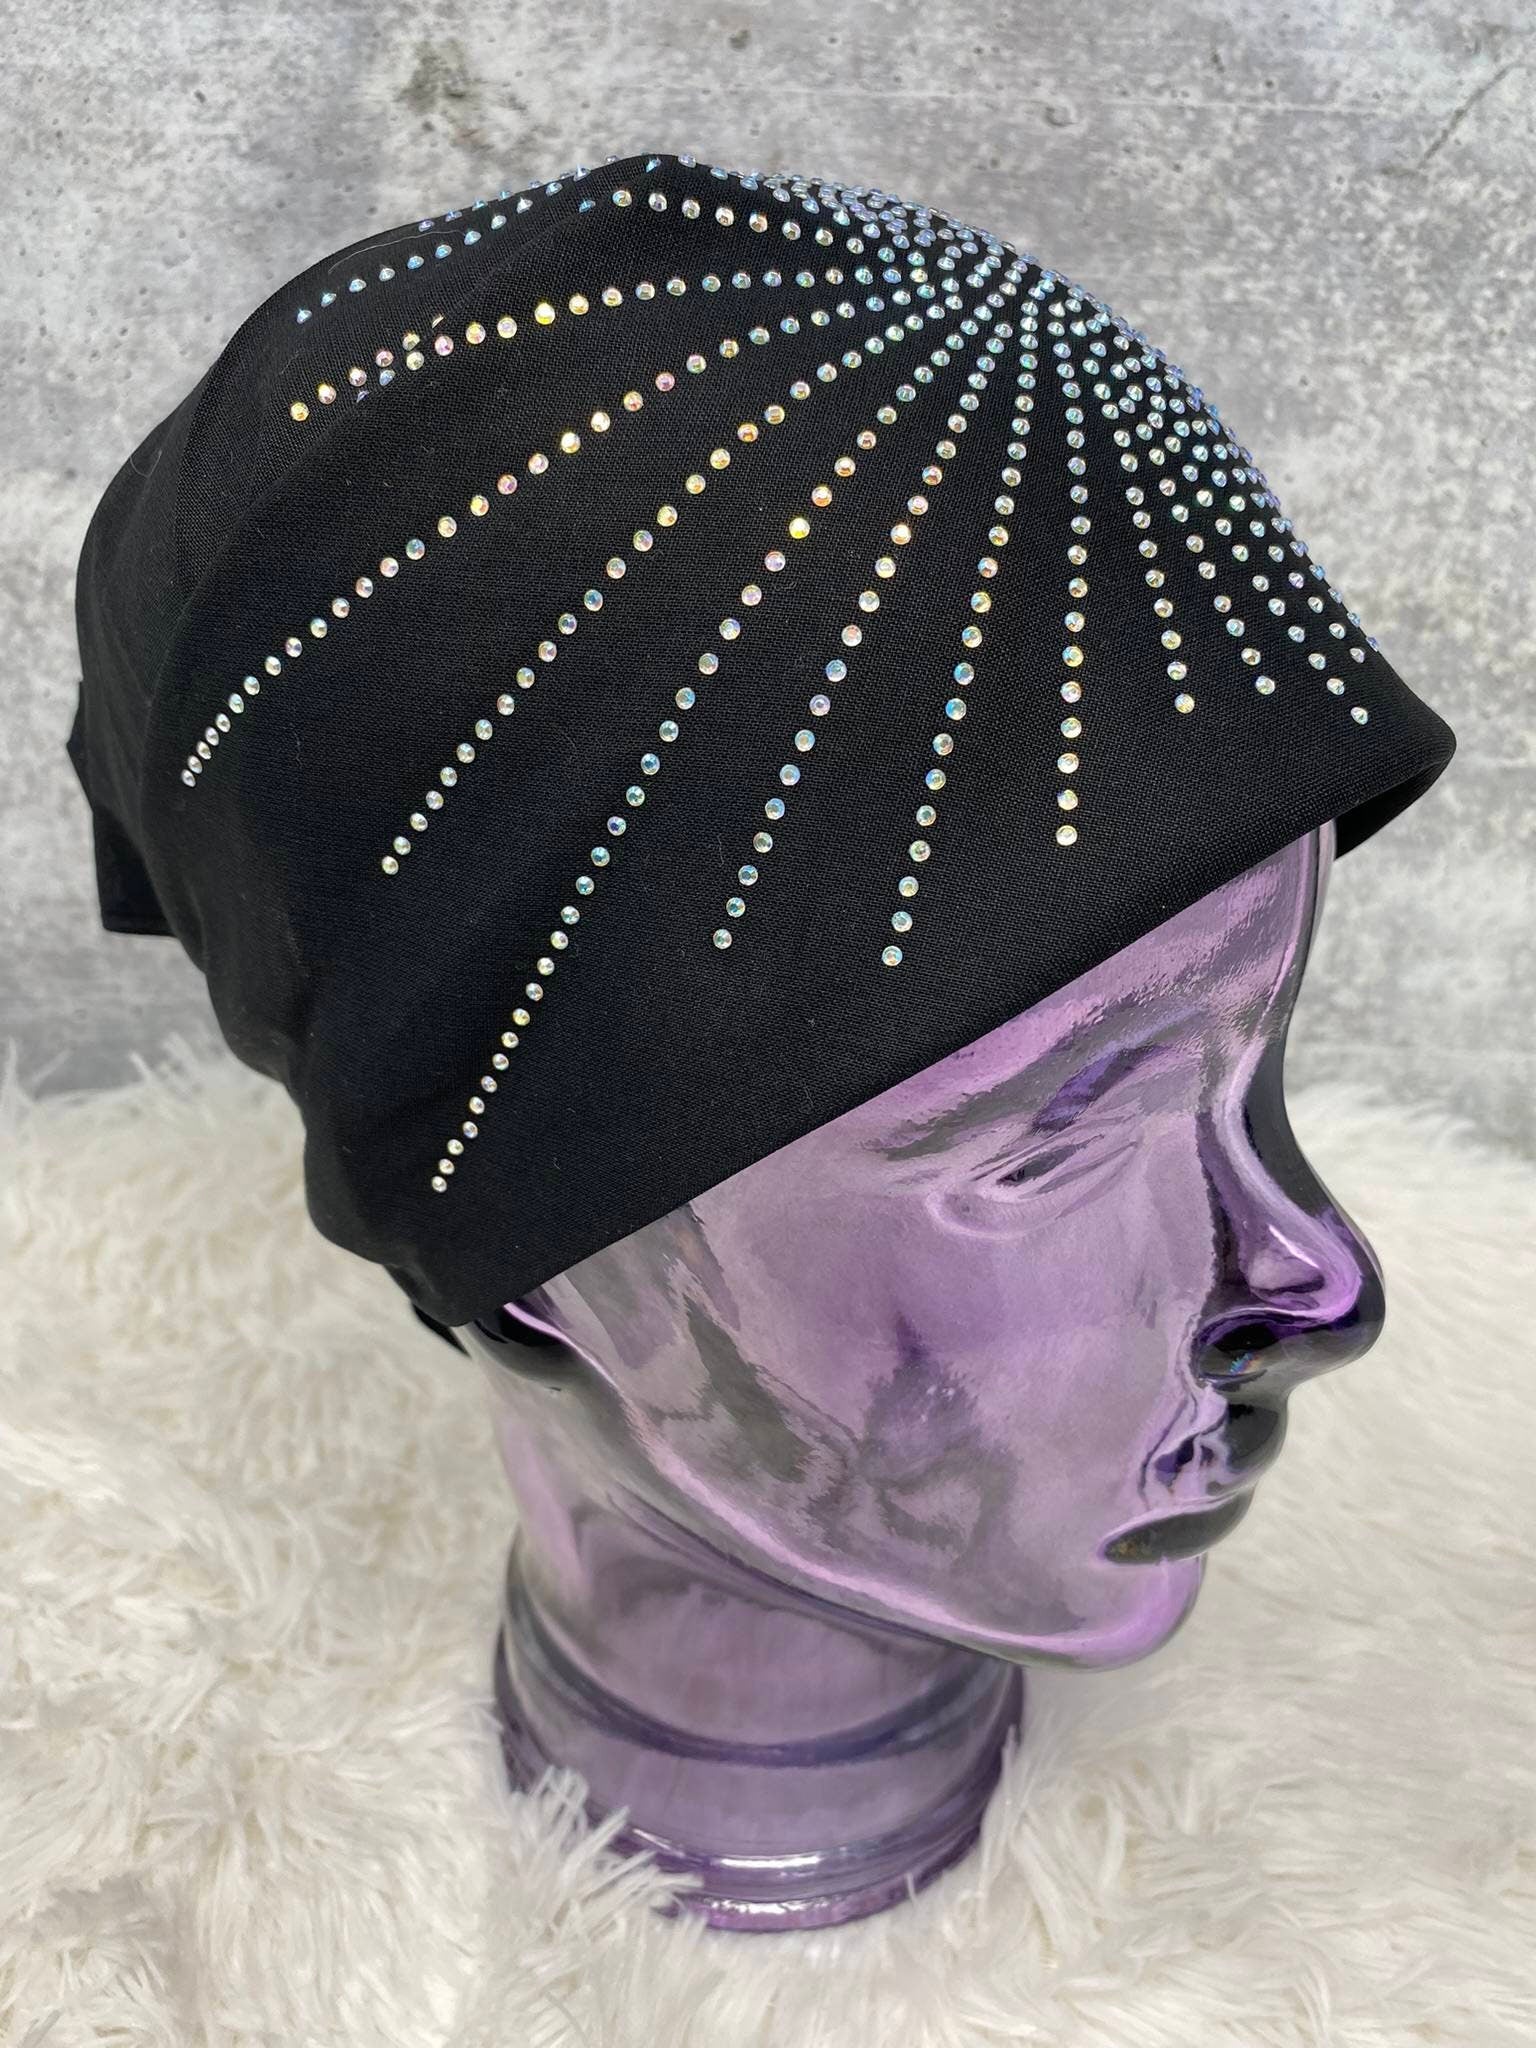 Sparkling Bursts, Handmade Bling Headscarf, Women's Bandana Accessories, Scarf for Bikers, Work-out, Bad Hair Day, Blinged Out Head Cover